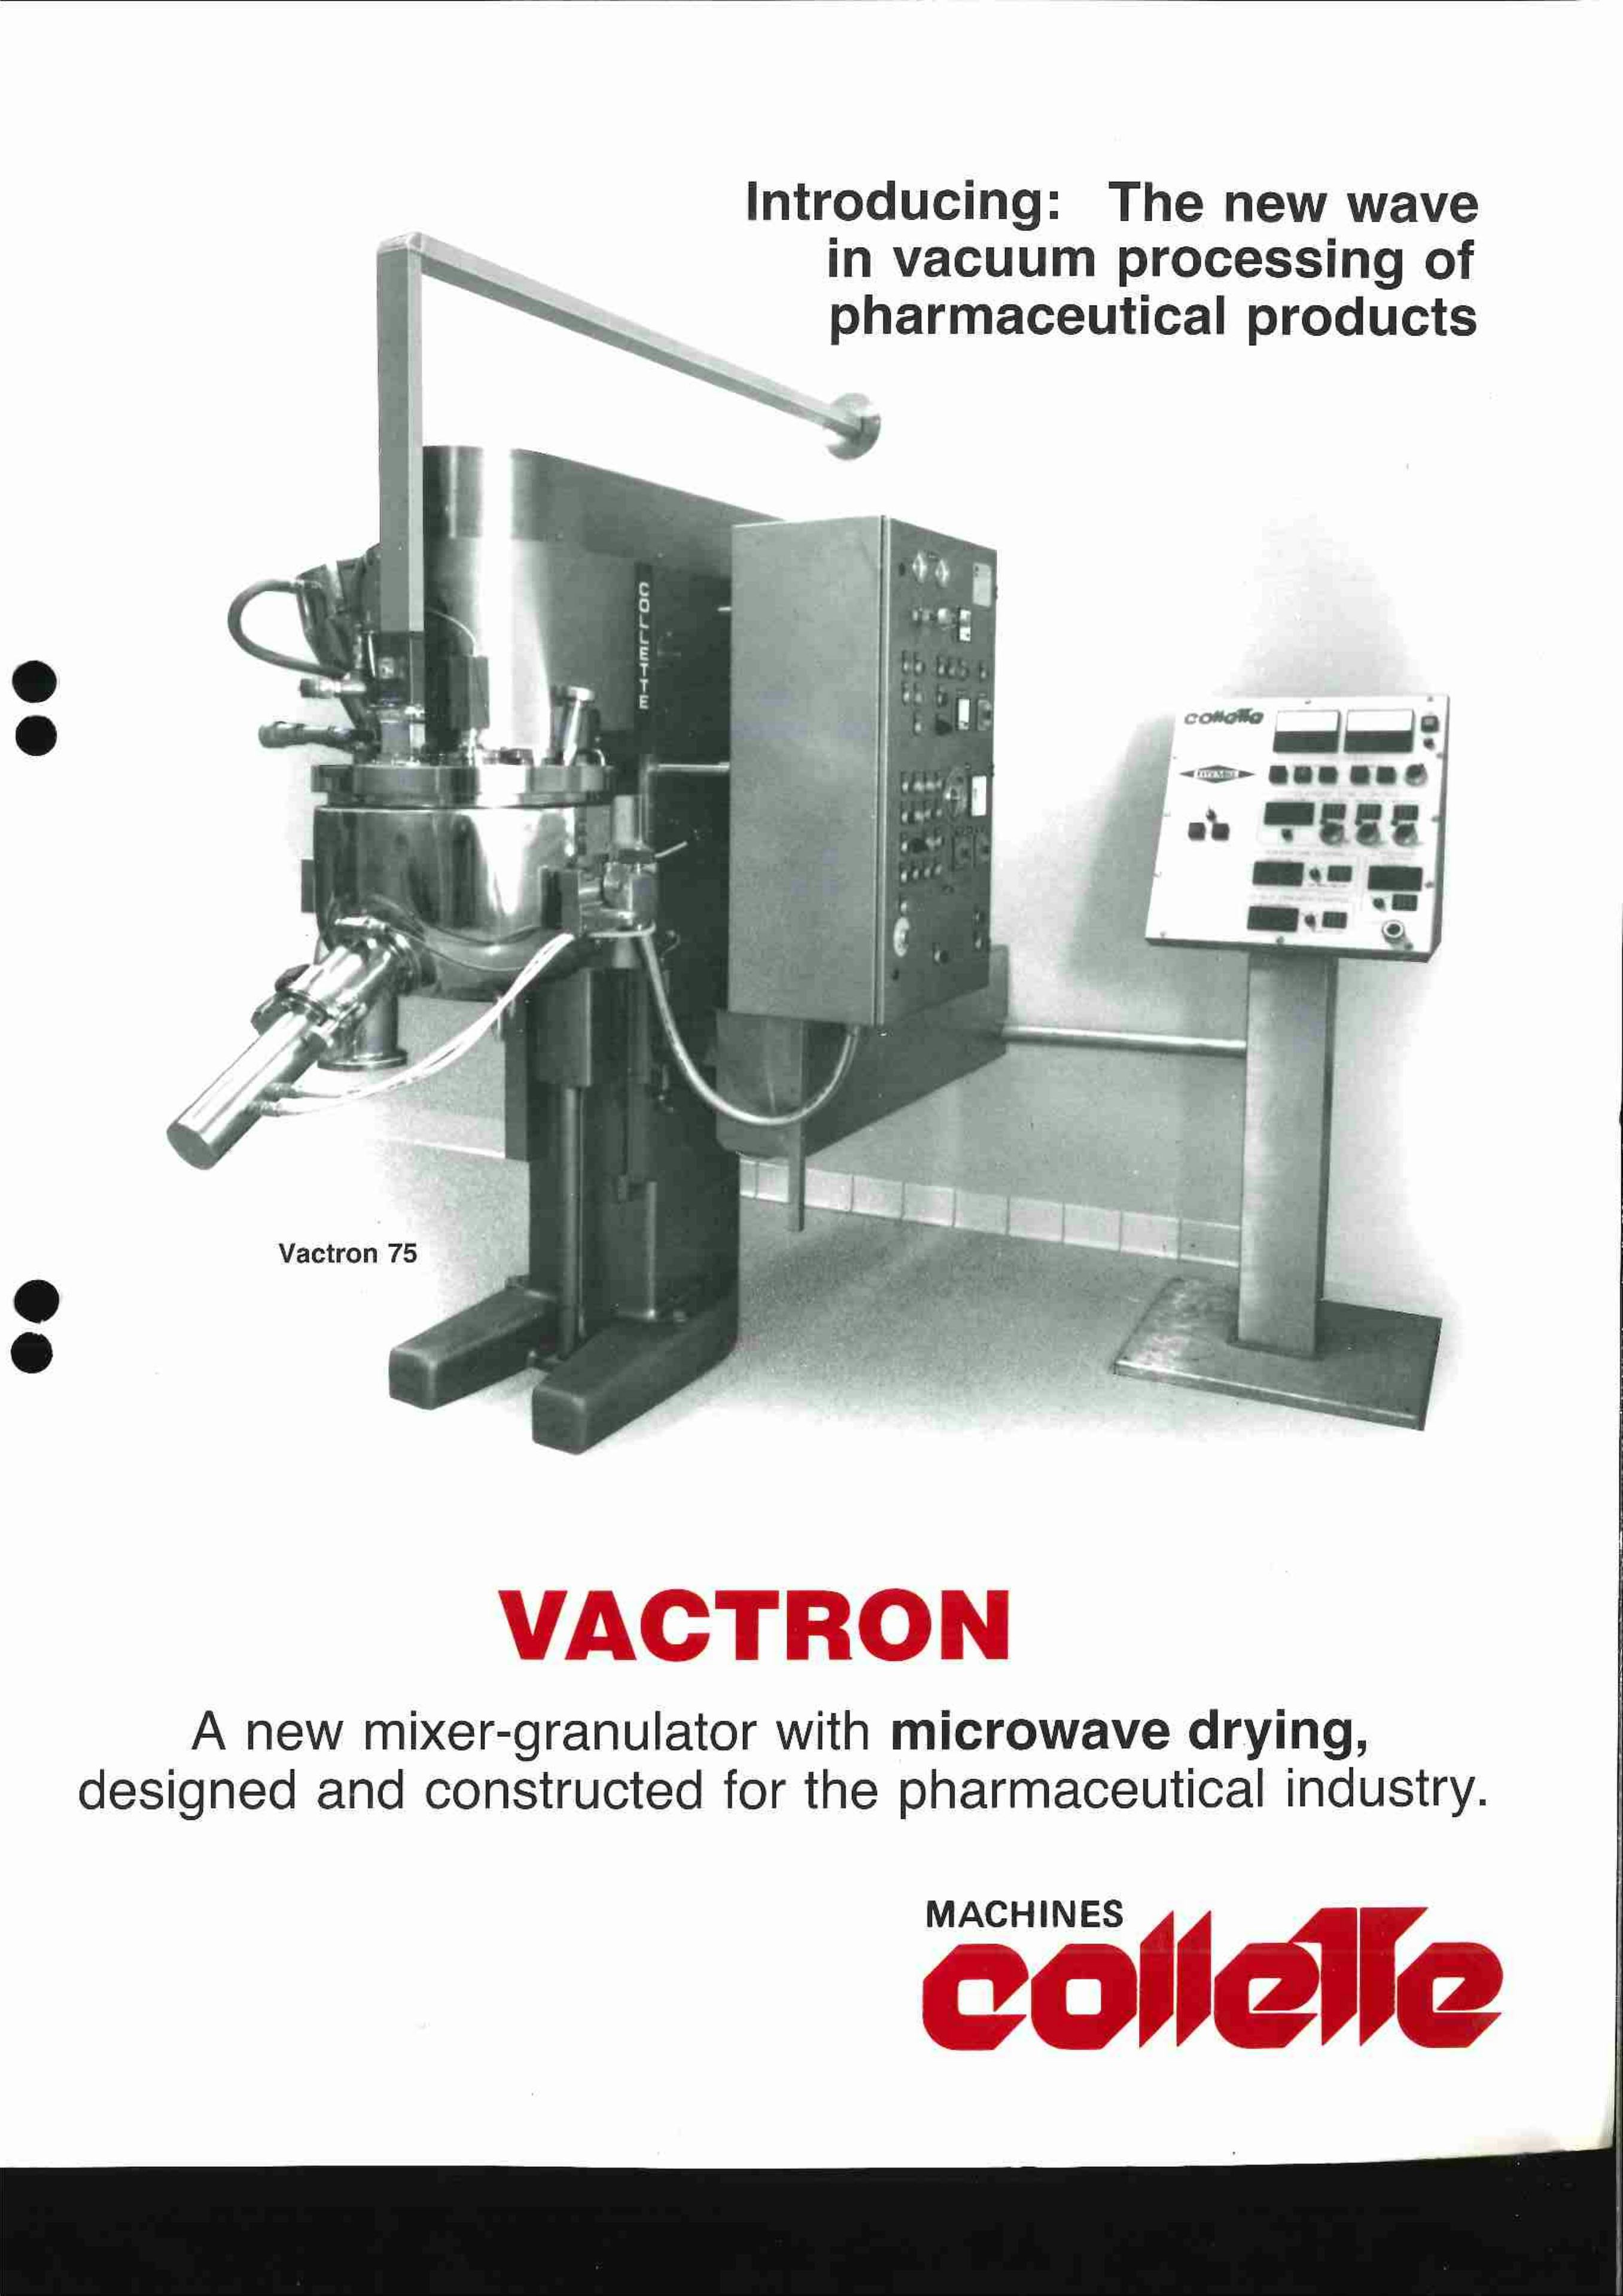 Collette GRAL 75 Vactron Microwave Drying and Solvent Recovery - Universeelmenger - image 22